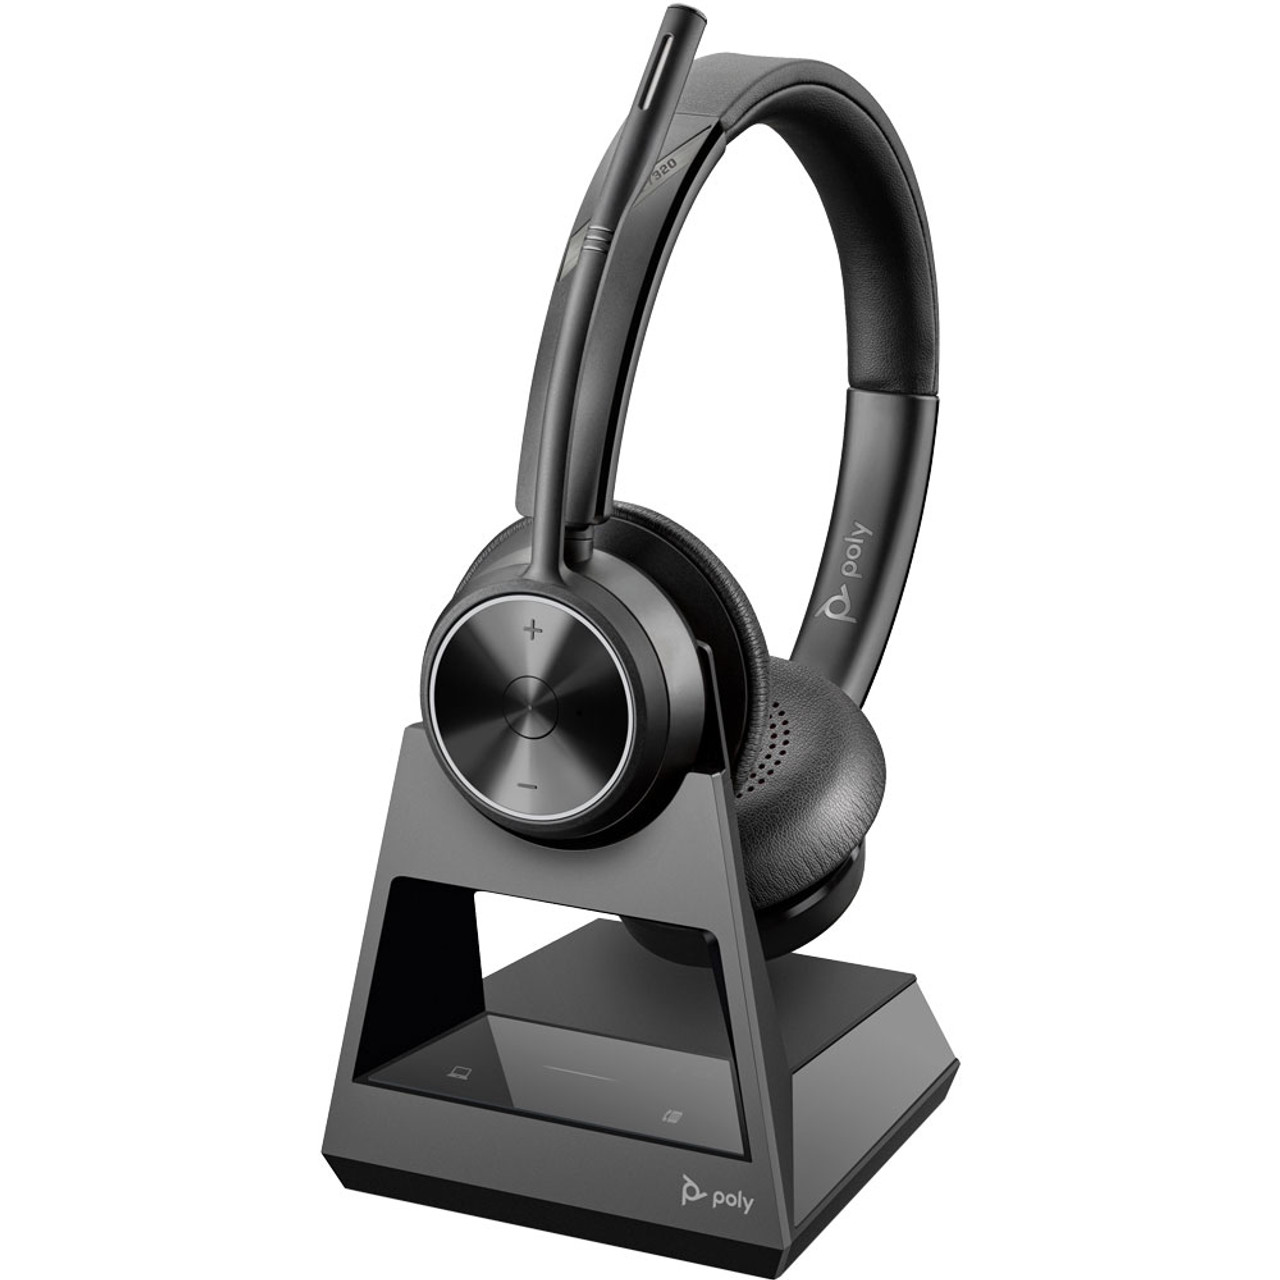 Poly Savi 7320 Office DECT Wireless - Stereo Headset 214777-01